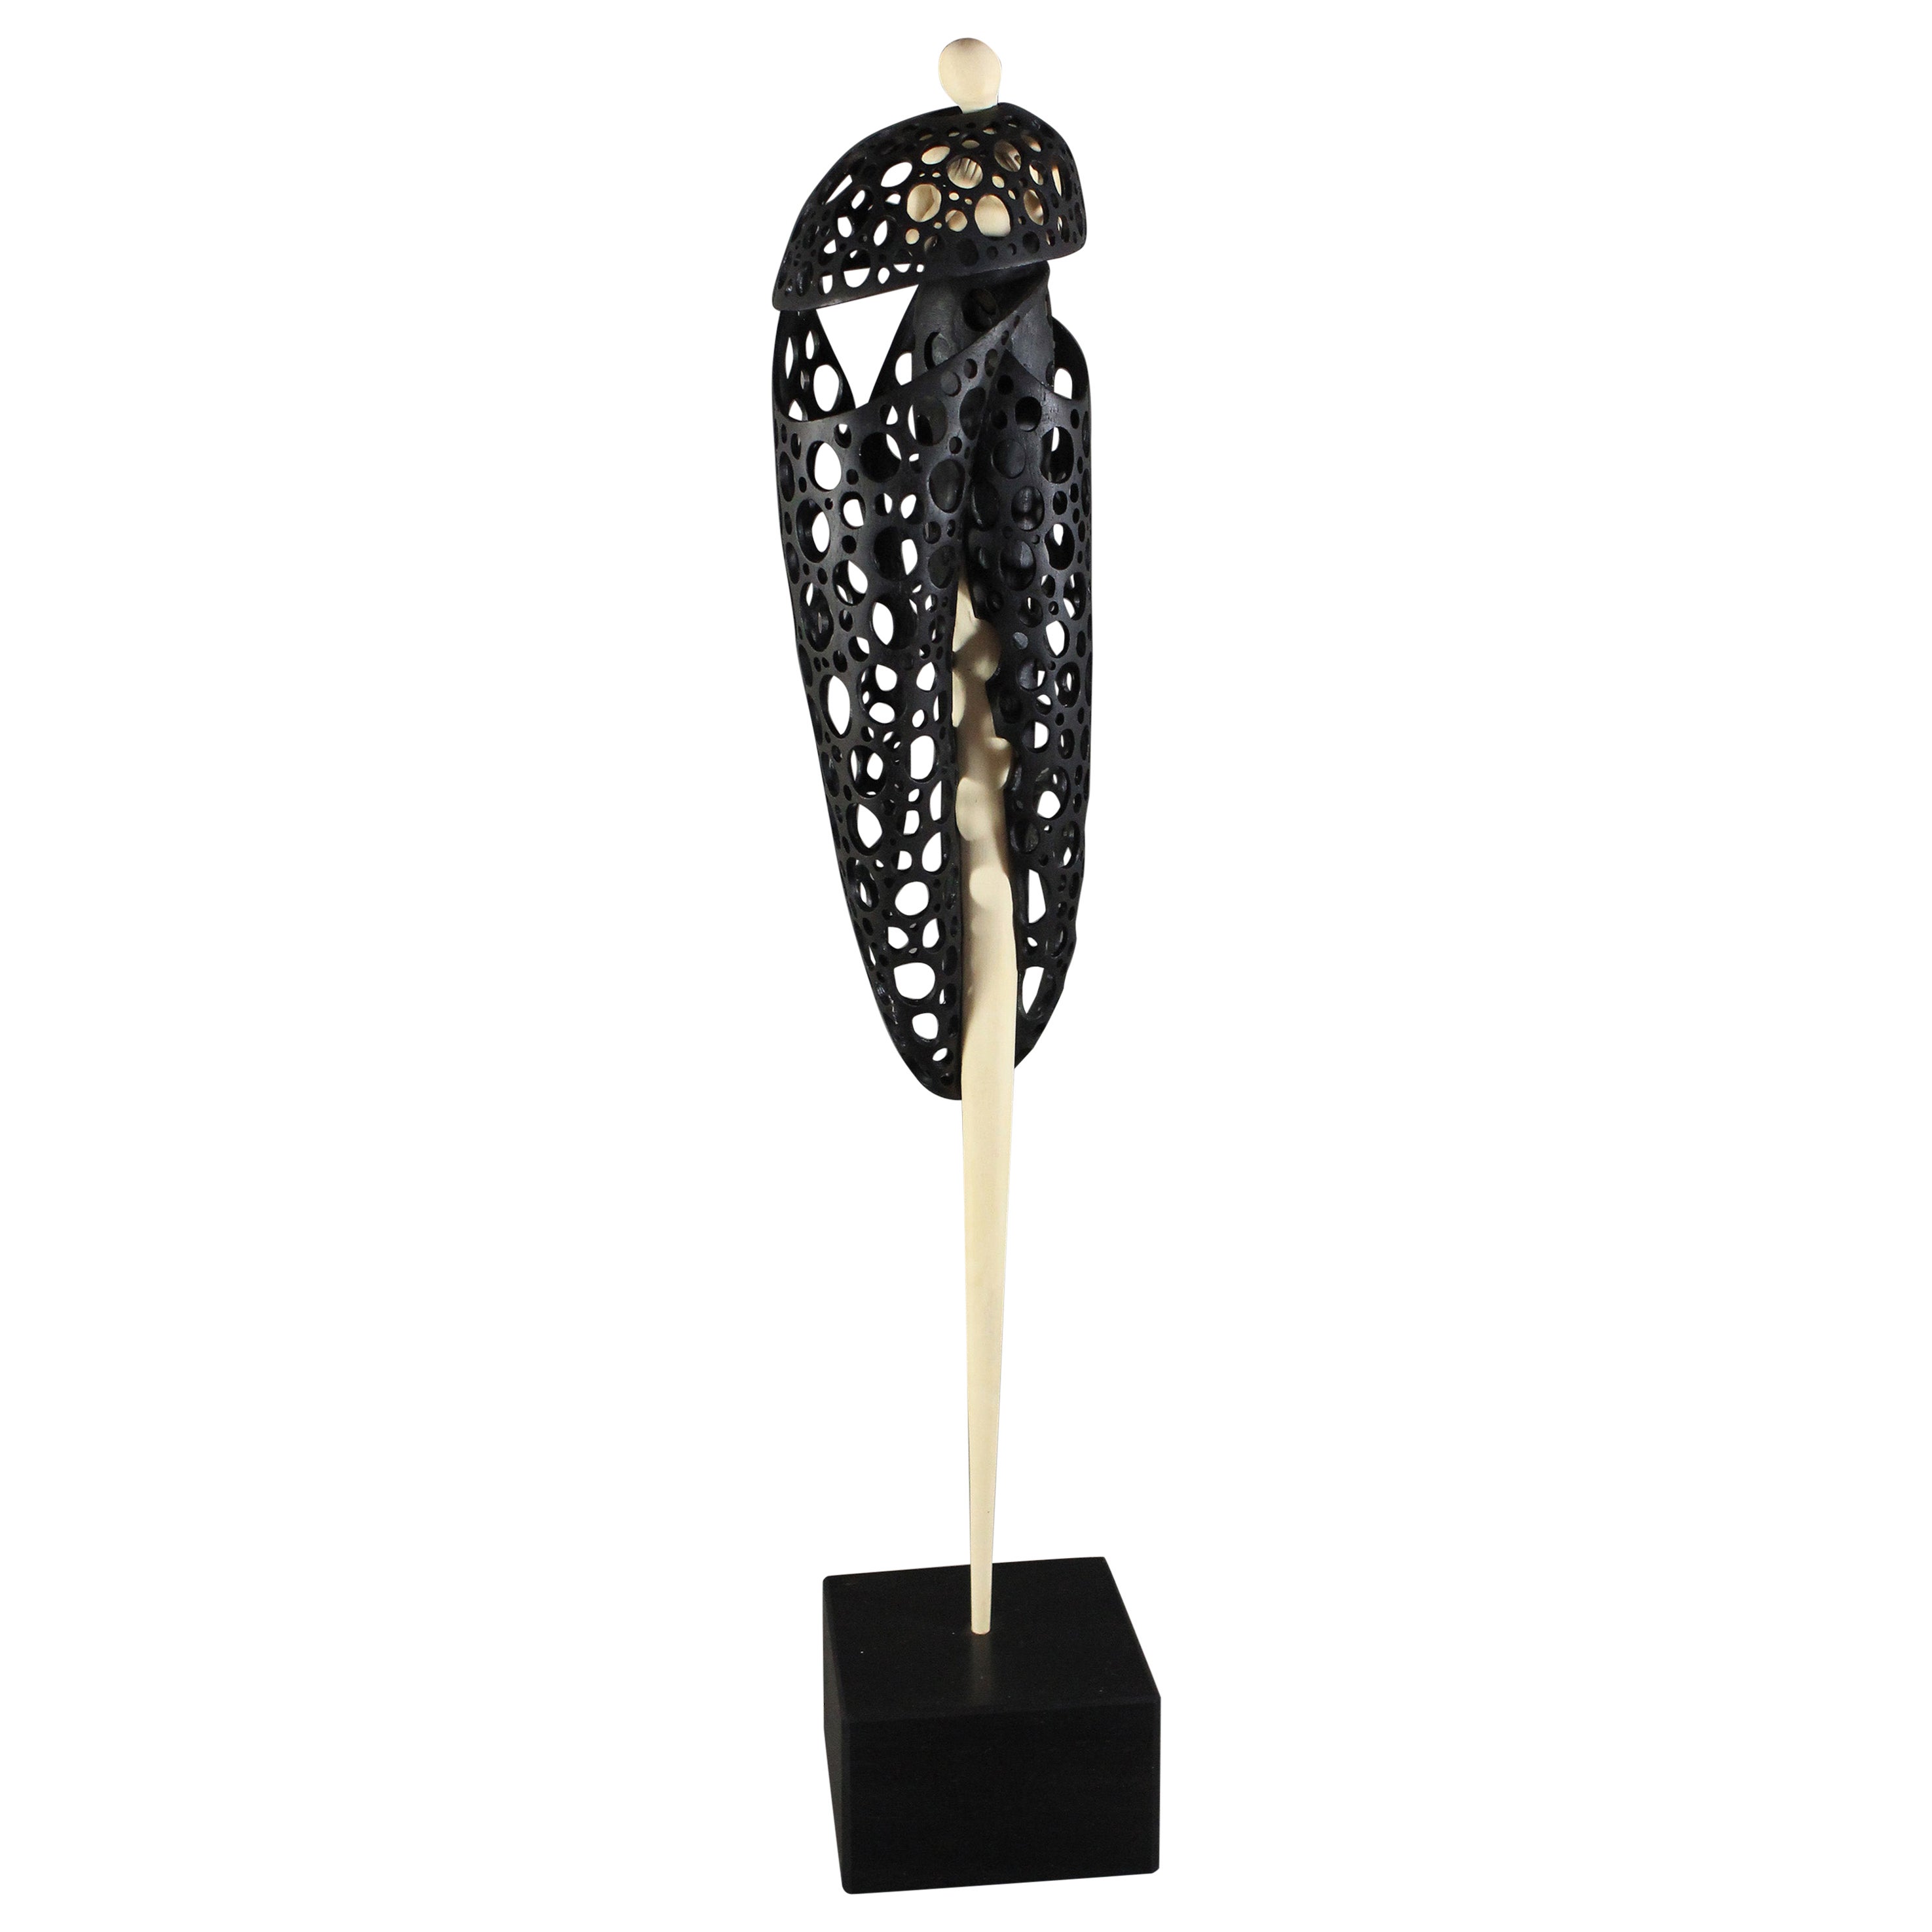 Untitled, Ebony, Holly Wood sculpture by Nairi Safaryan For Sale